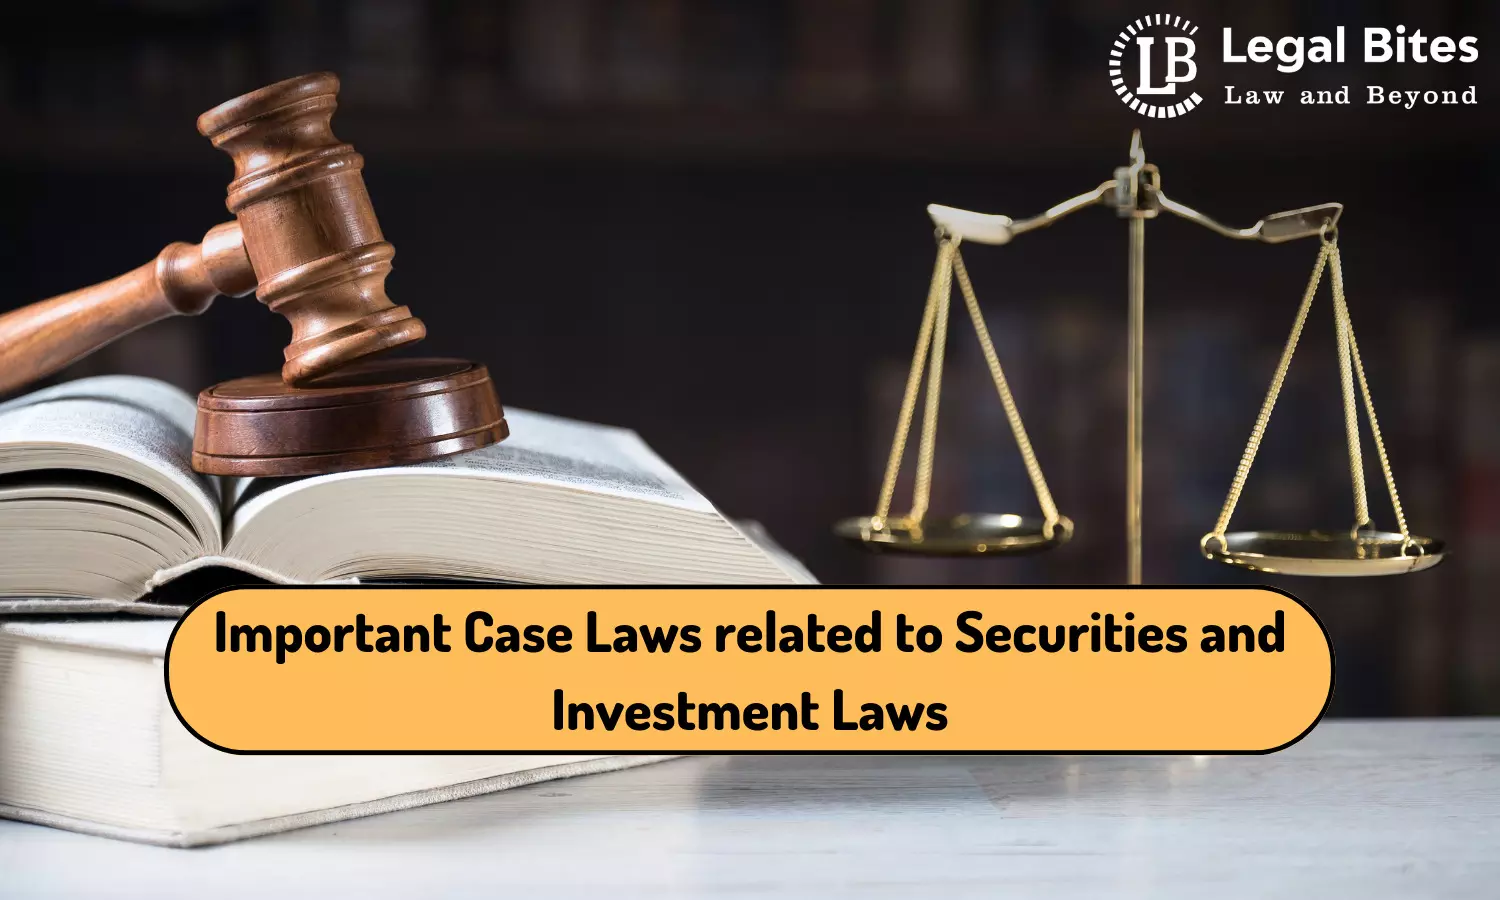 Important Case Laws related to Securities and Investment Laws